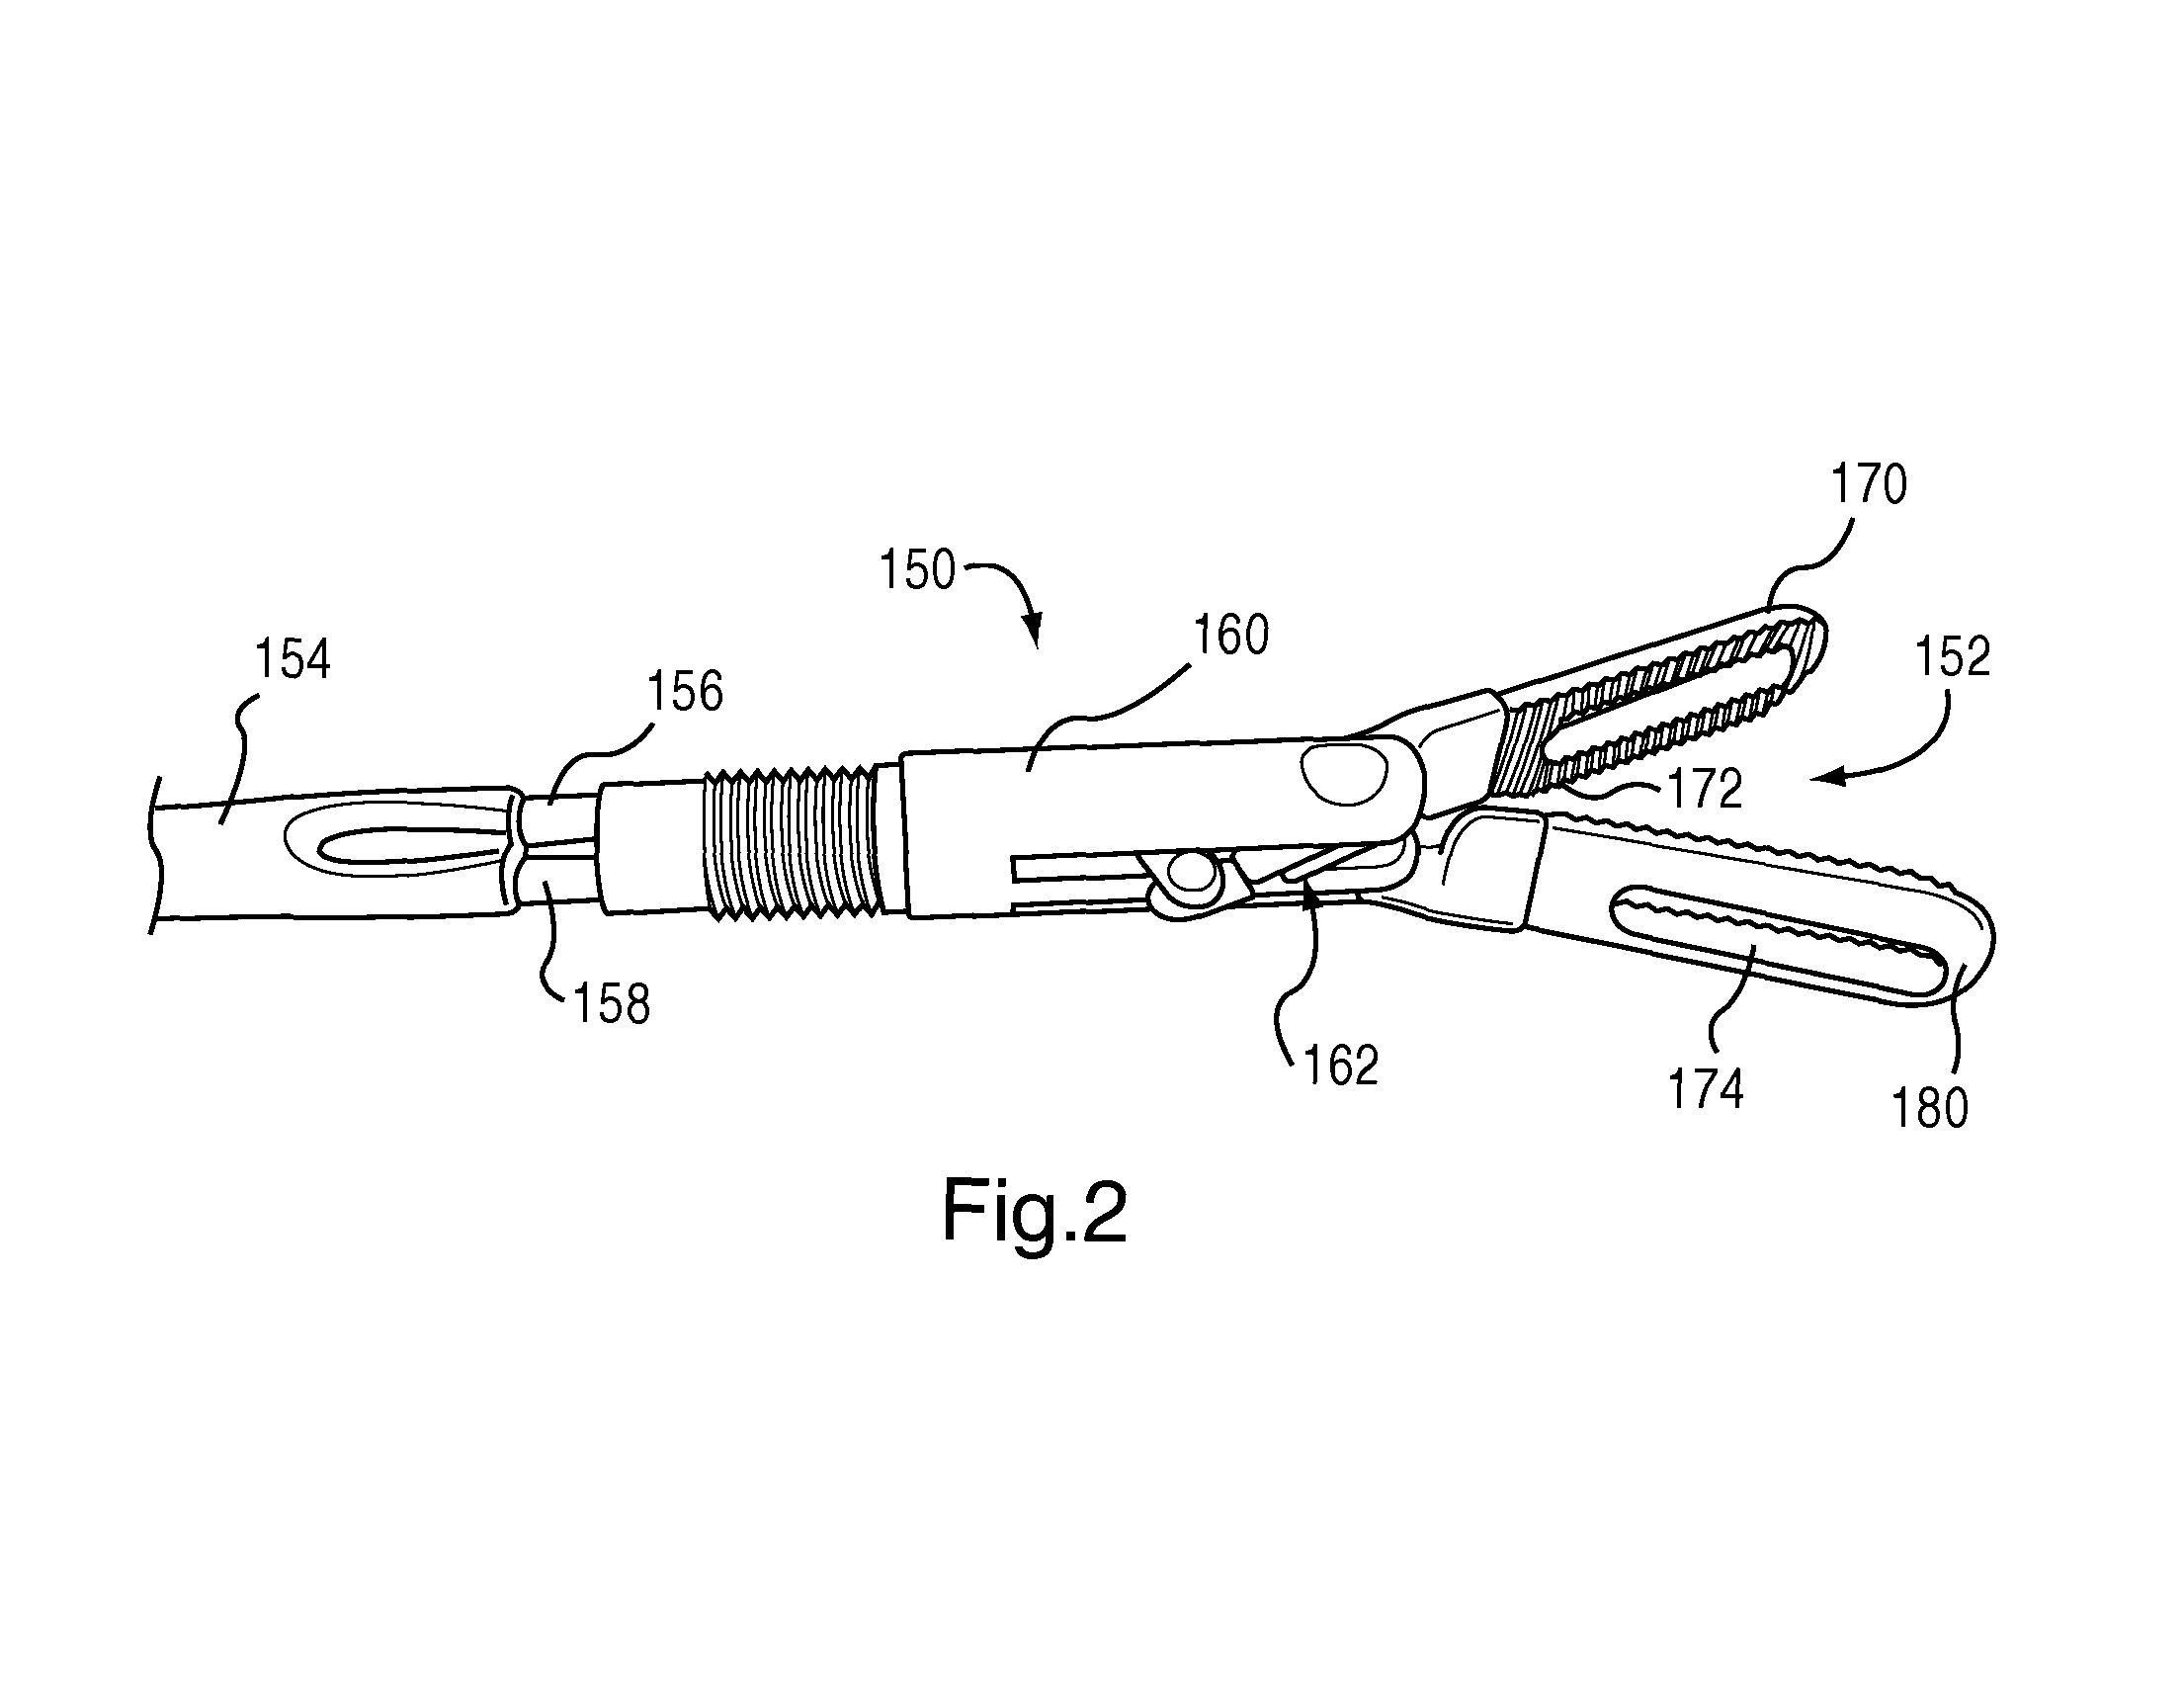 Combined bipolar and monopolar electrosurgical instrument and method